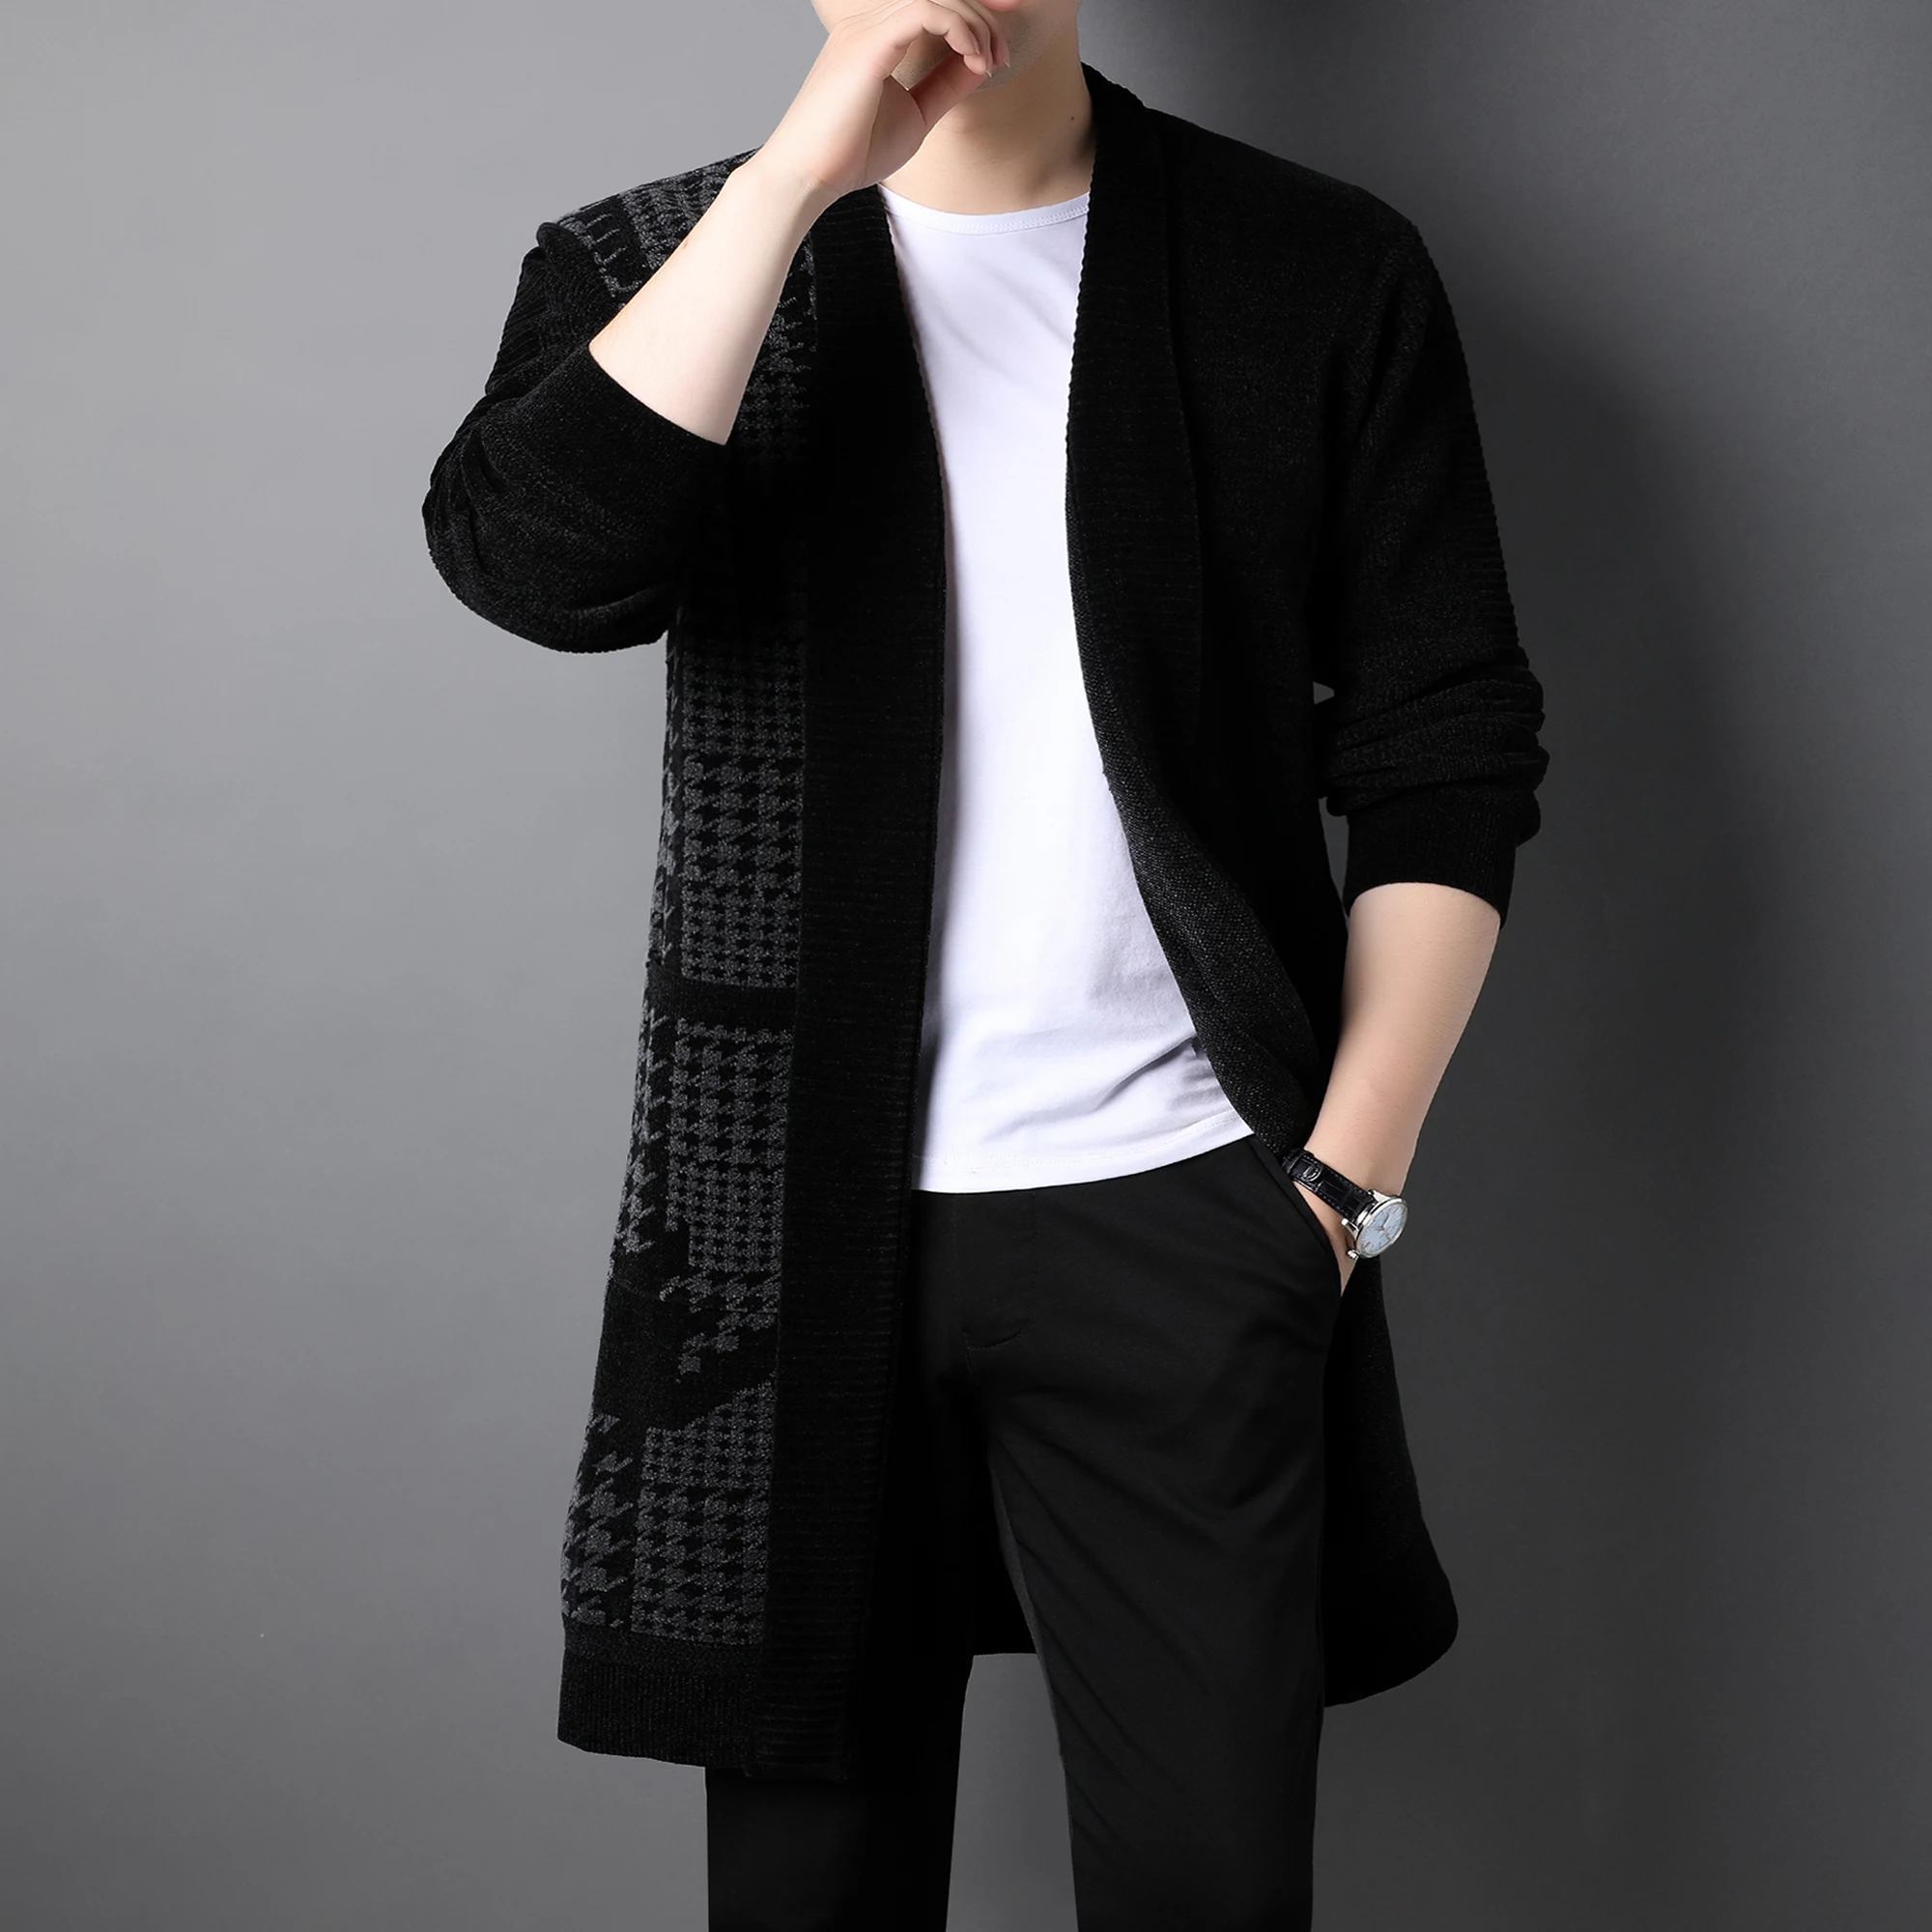 Sweater Coats Men New Fashion 2022 Autumn Slim Long Solid Color Knitted Jacket Fashion Men's Casual Sweater Cardigan Coats Q133